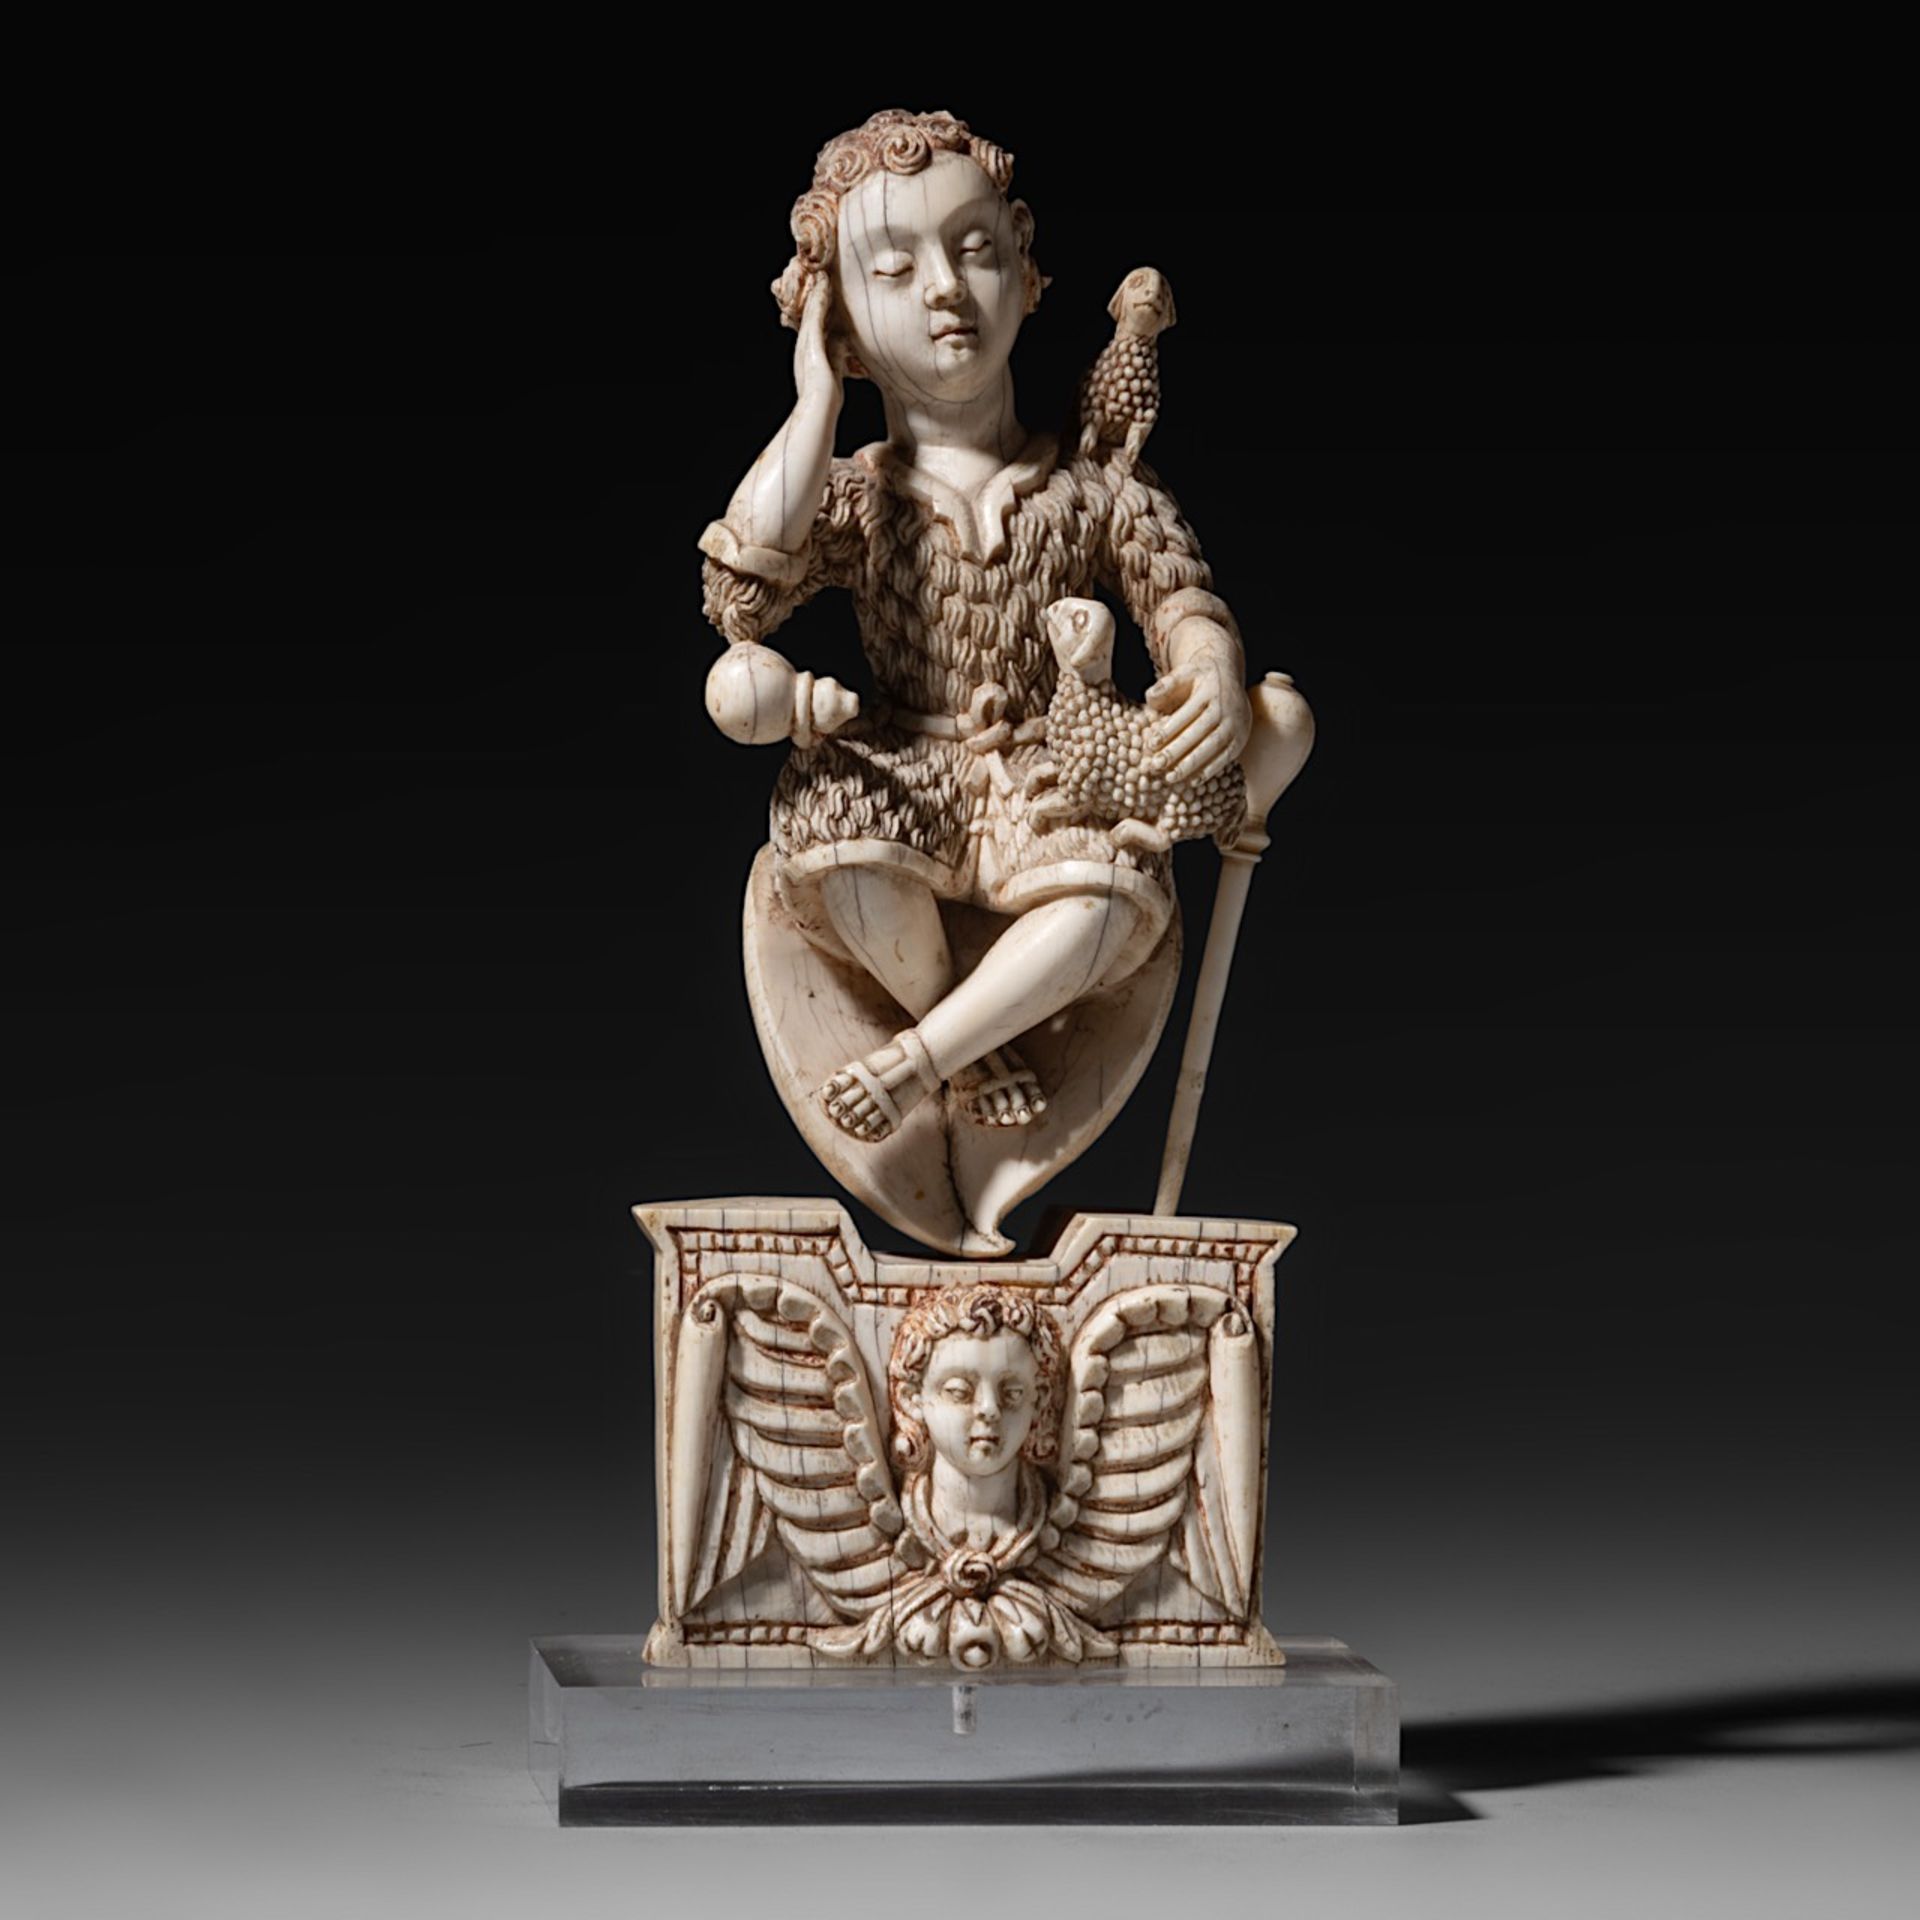 A large 17th-18thC Goa ivory carving of Christ represented as the Good Shepherd, ivory H 22,5 cm - t